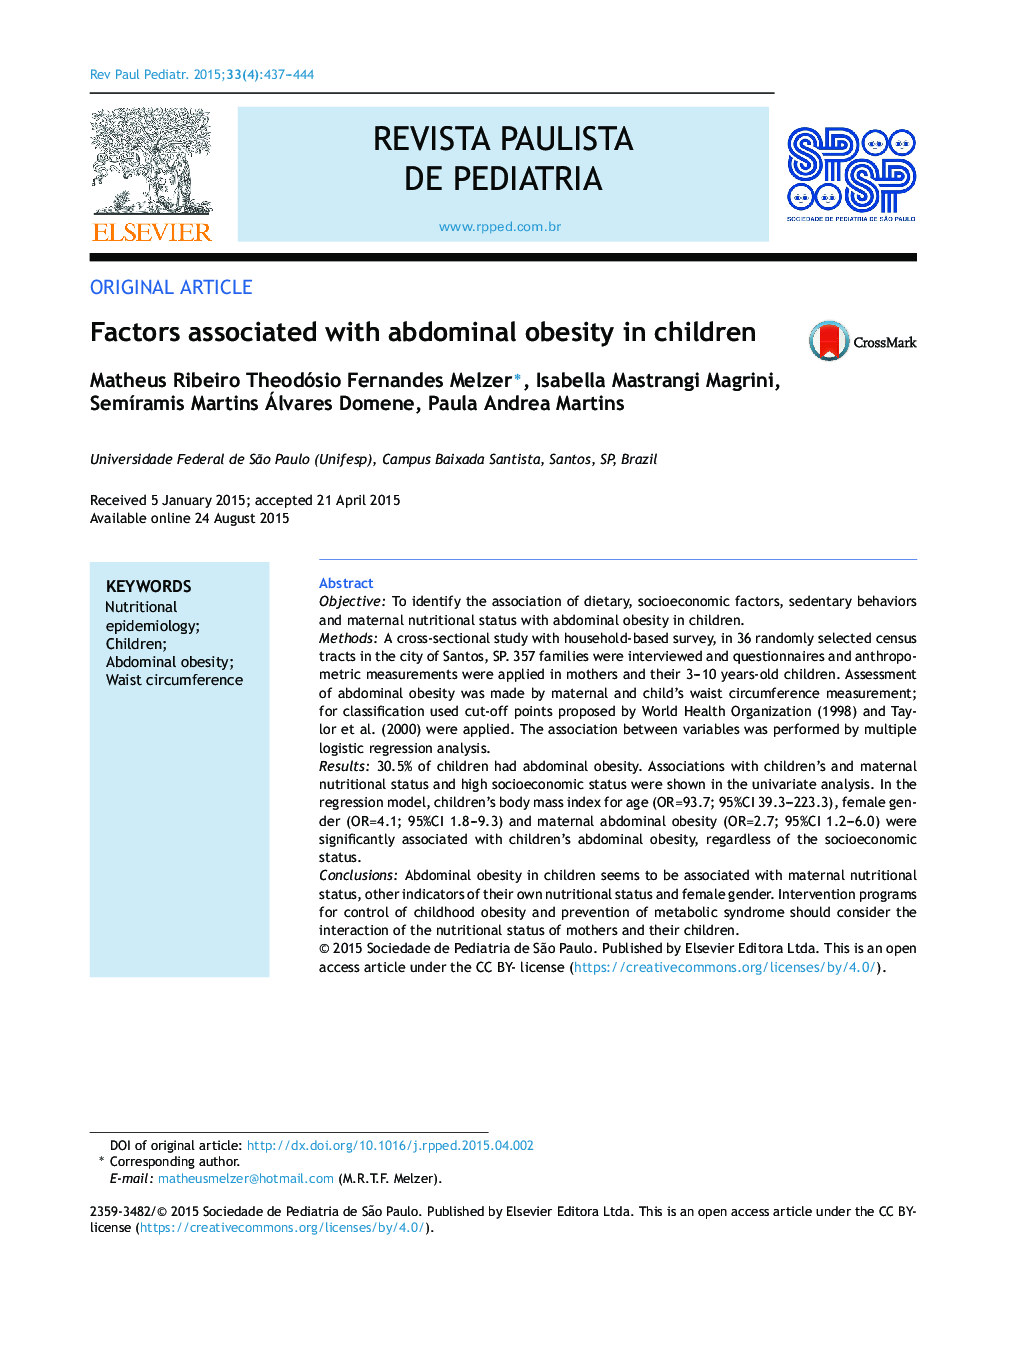 Factors associated with abdominal obesity in children